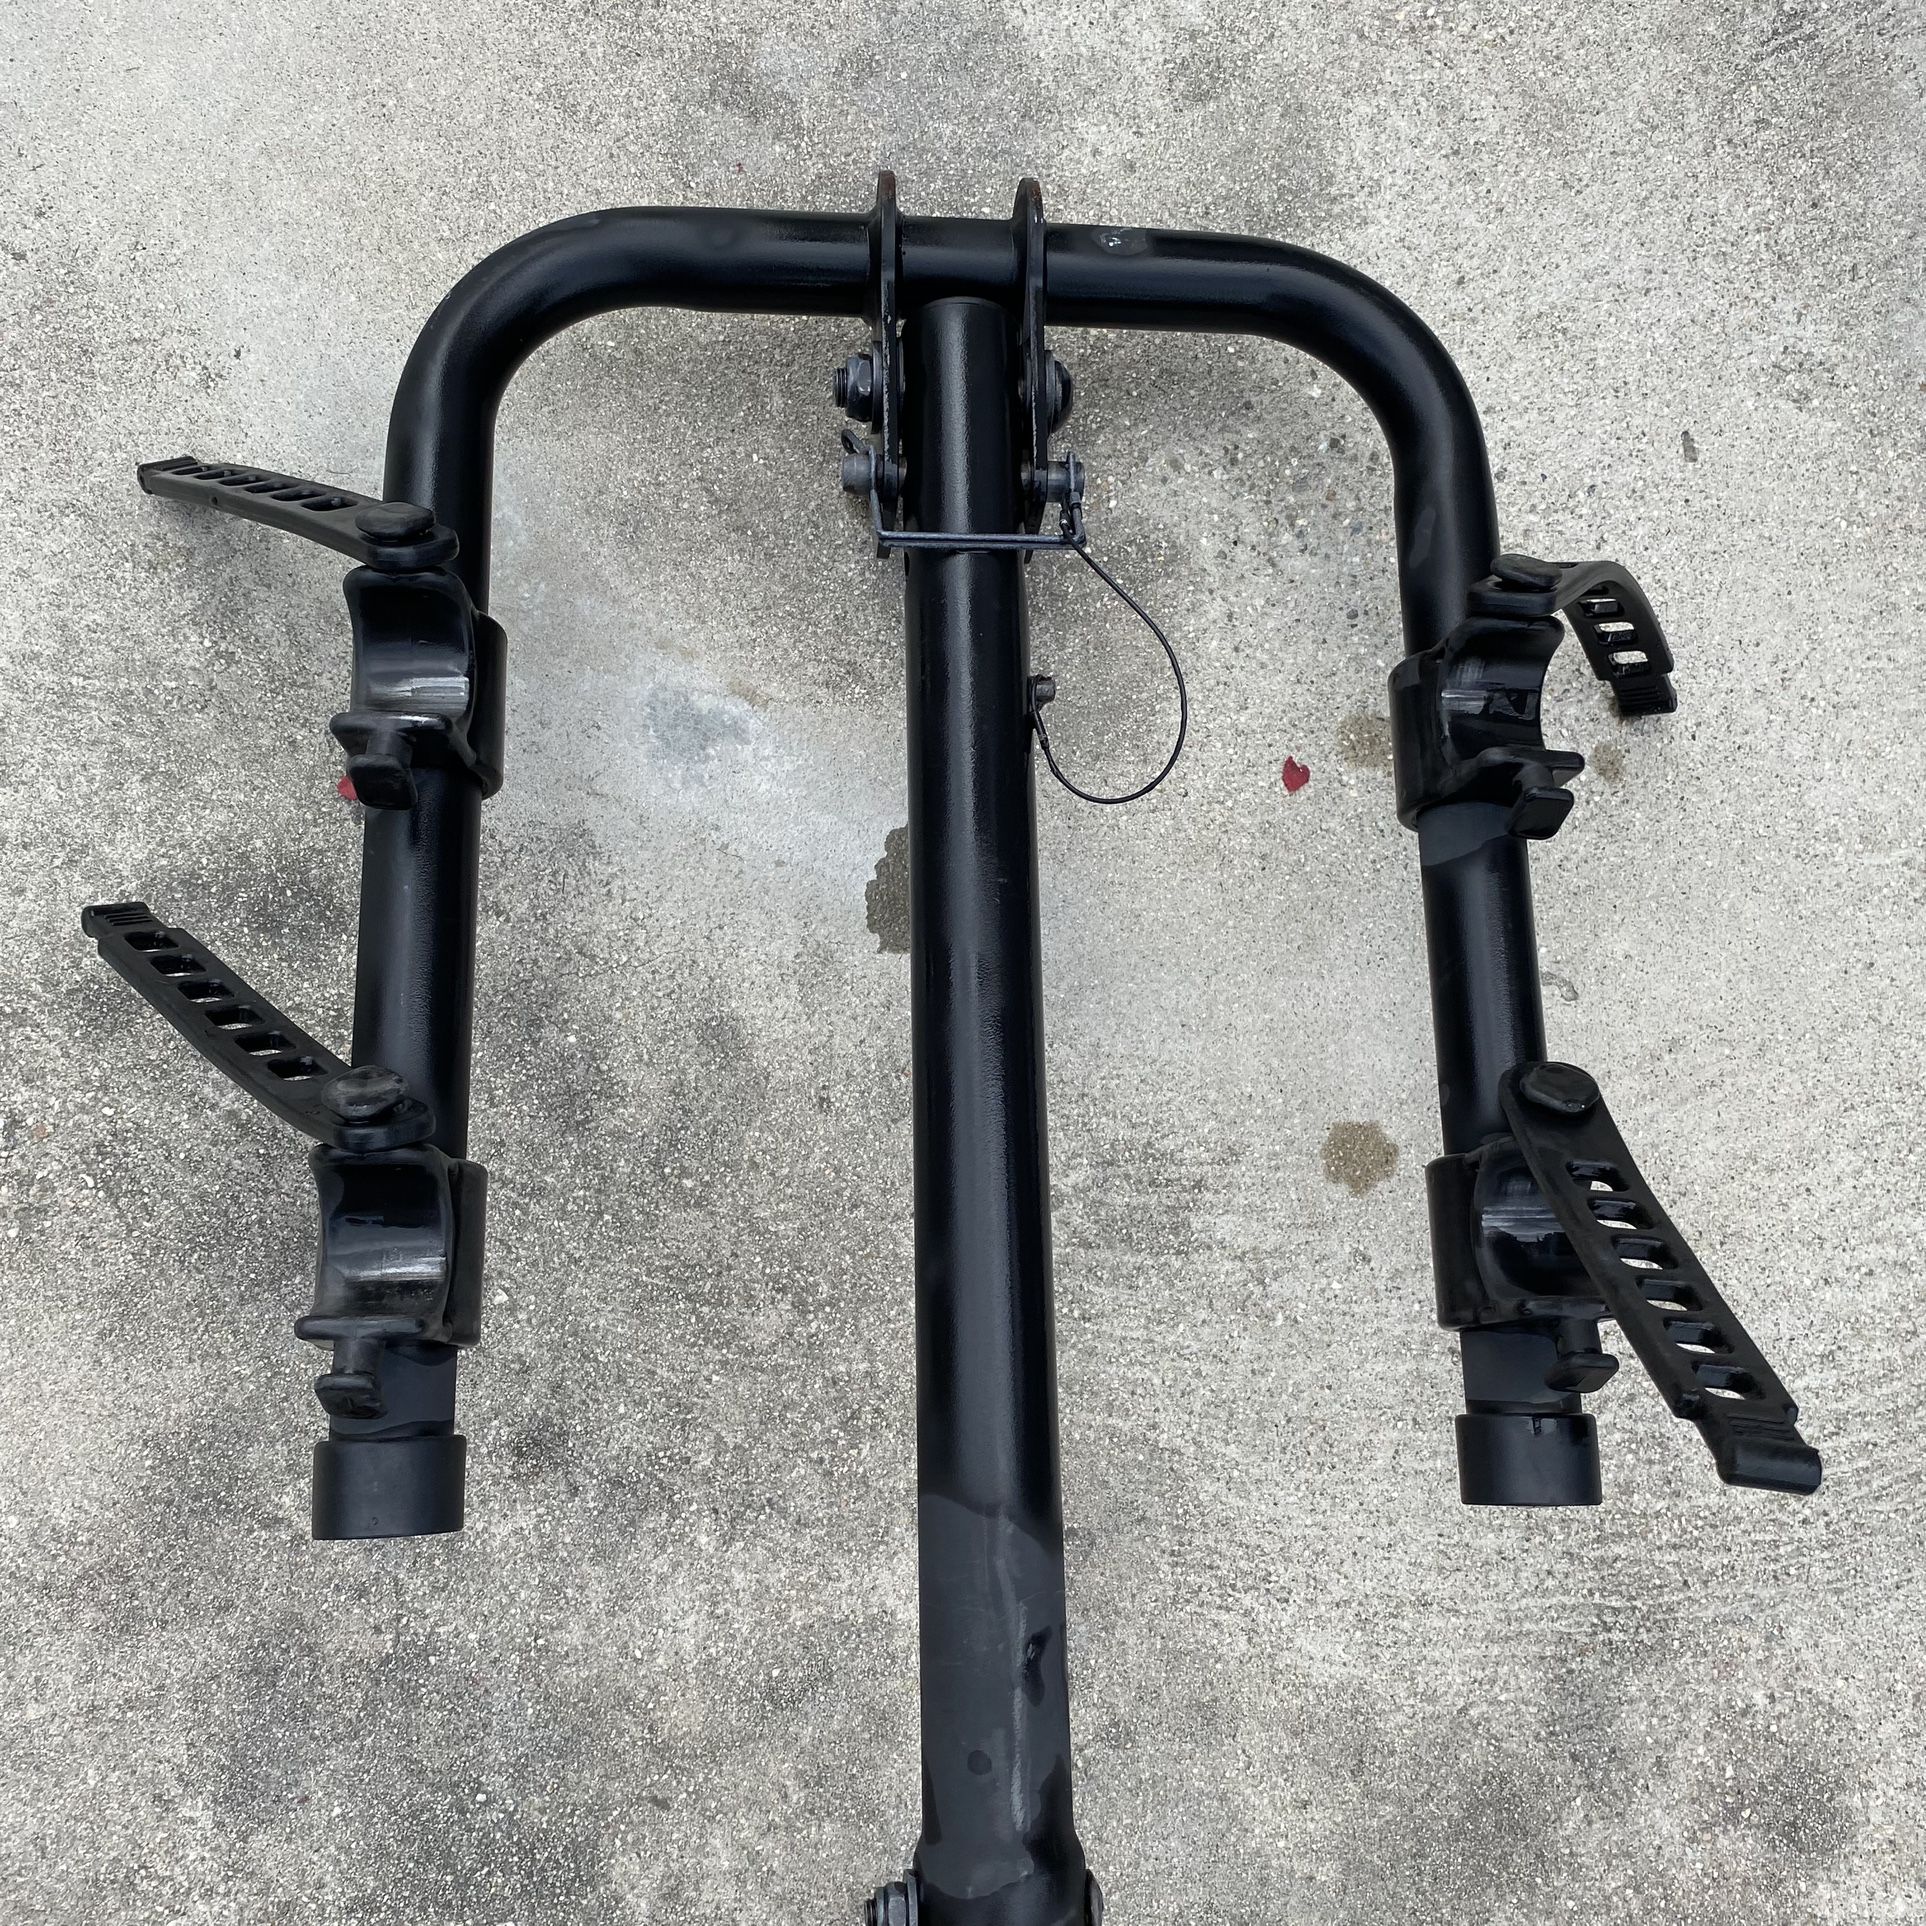 Hollywood Hitch Bike Rack For 2 Bikes Fits 1 1/4” Hitch